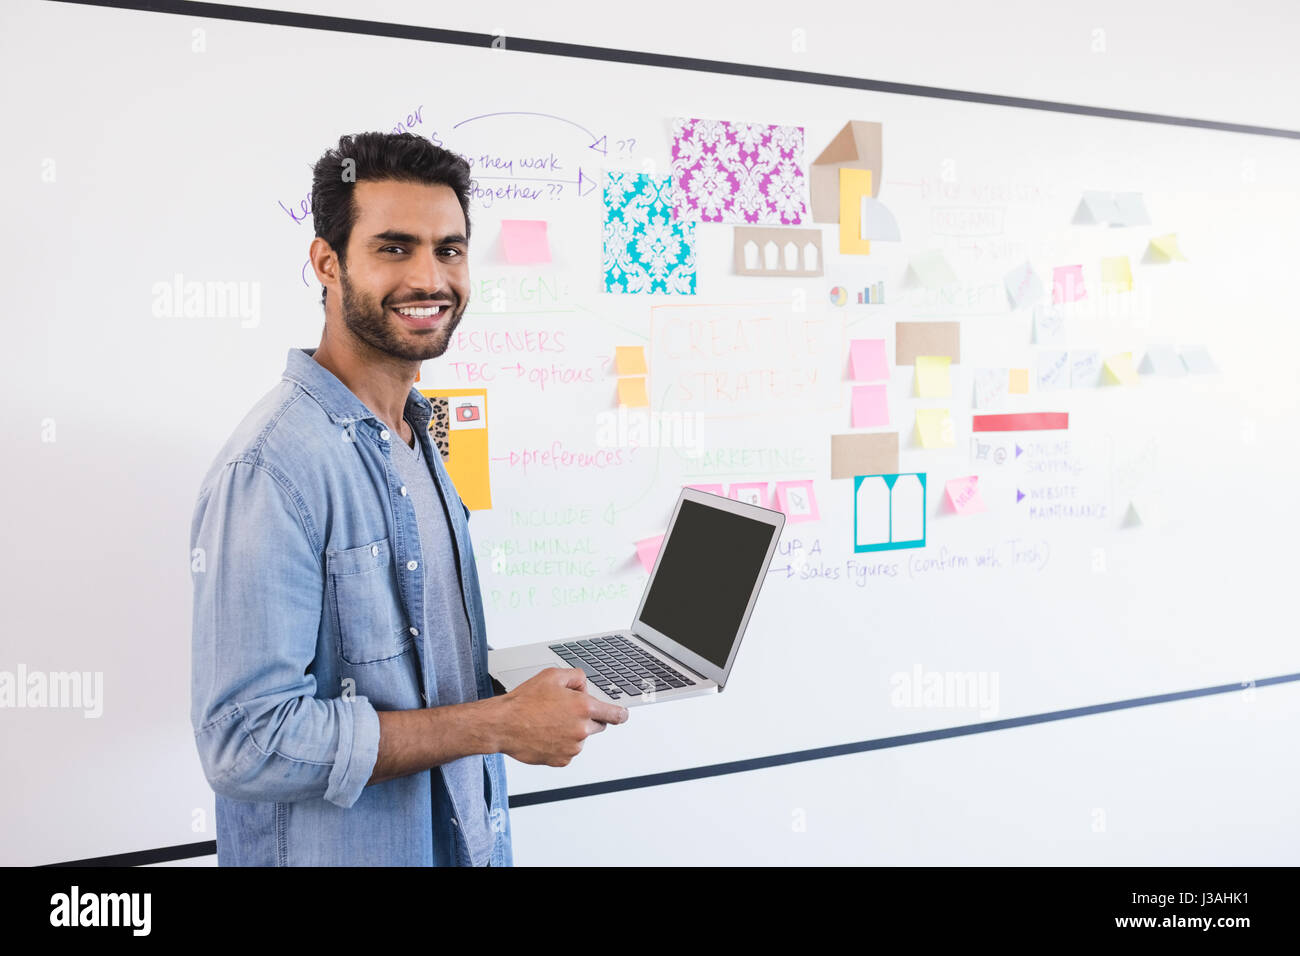 Portrait of businessman with laptop standing against whiteboard in office Stock Photo